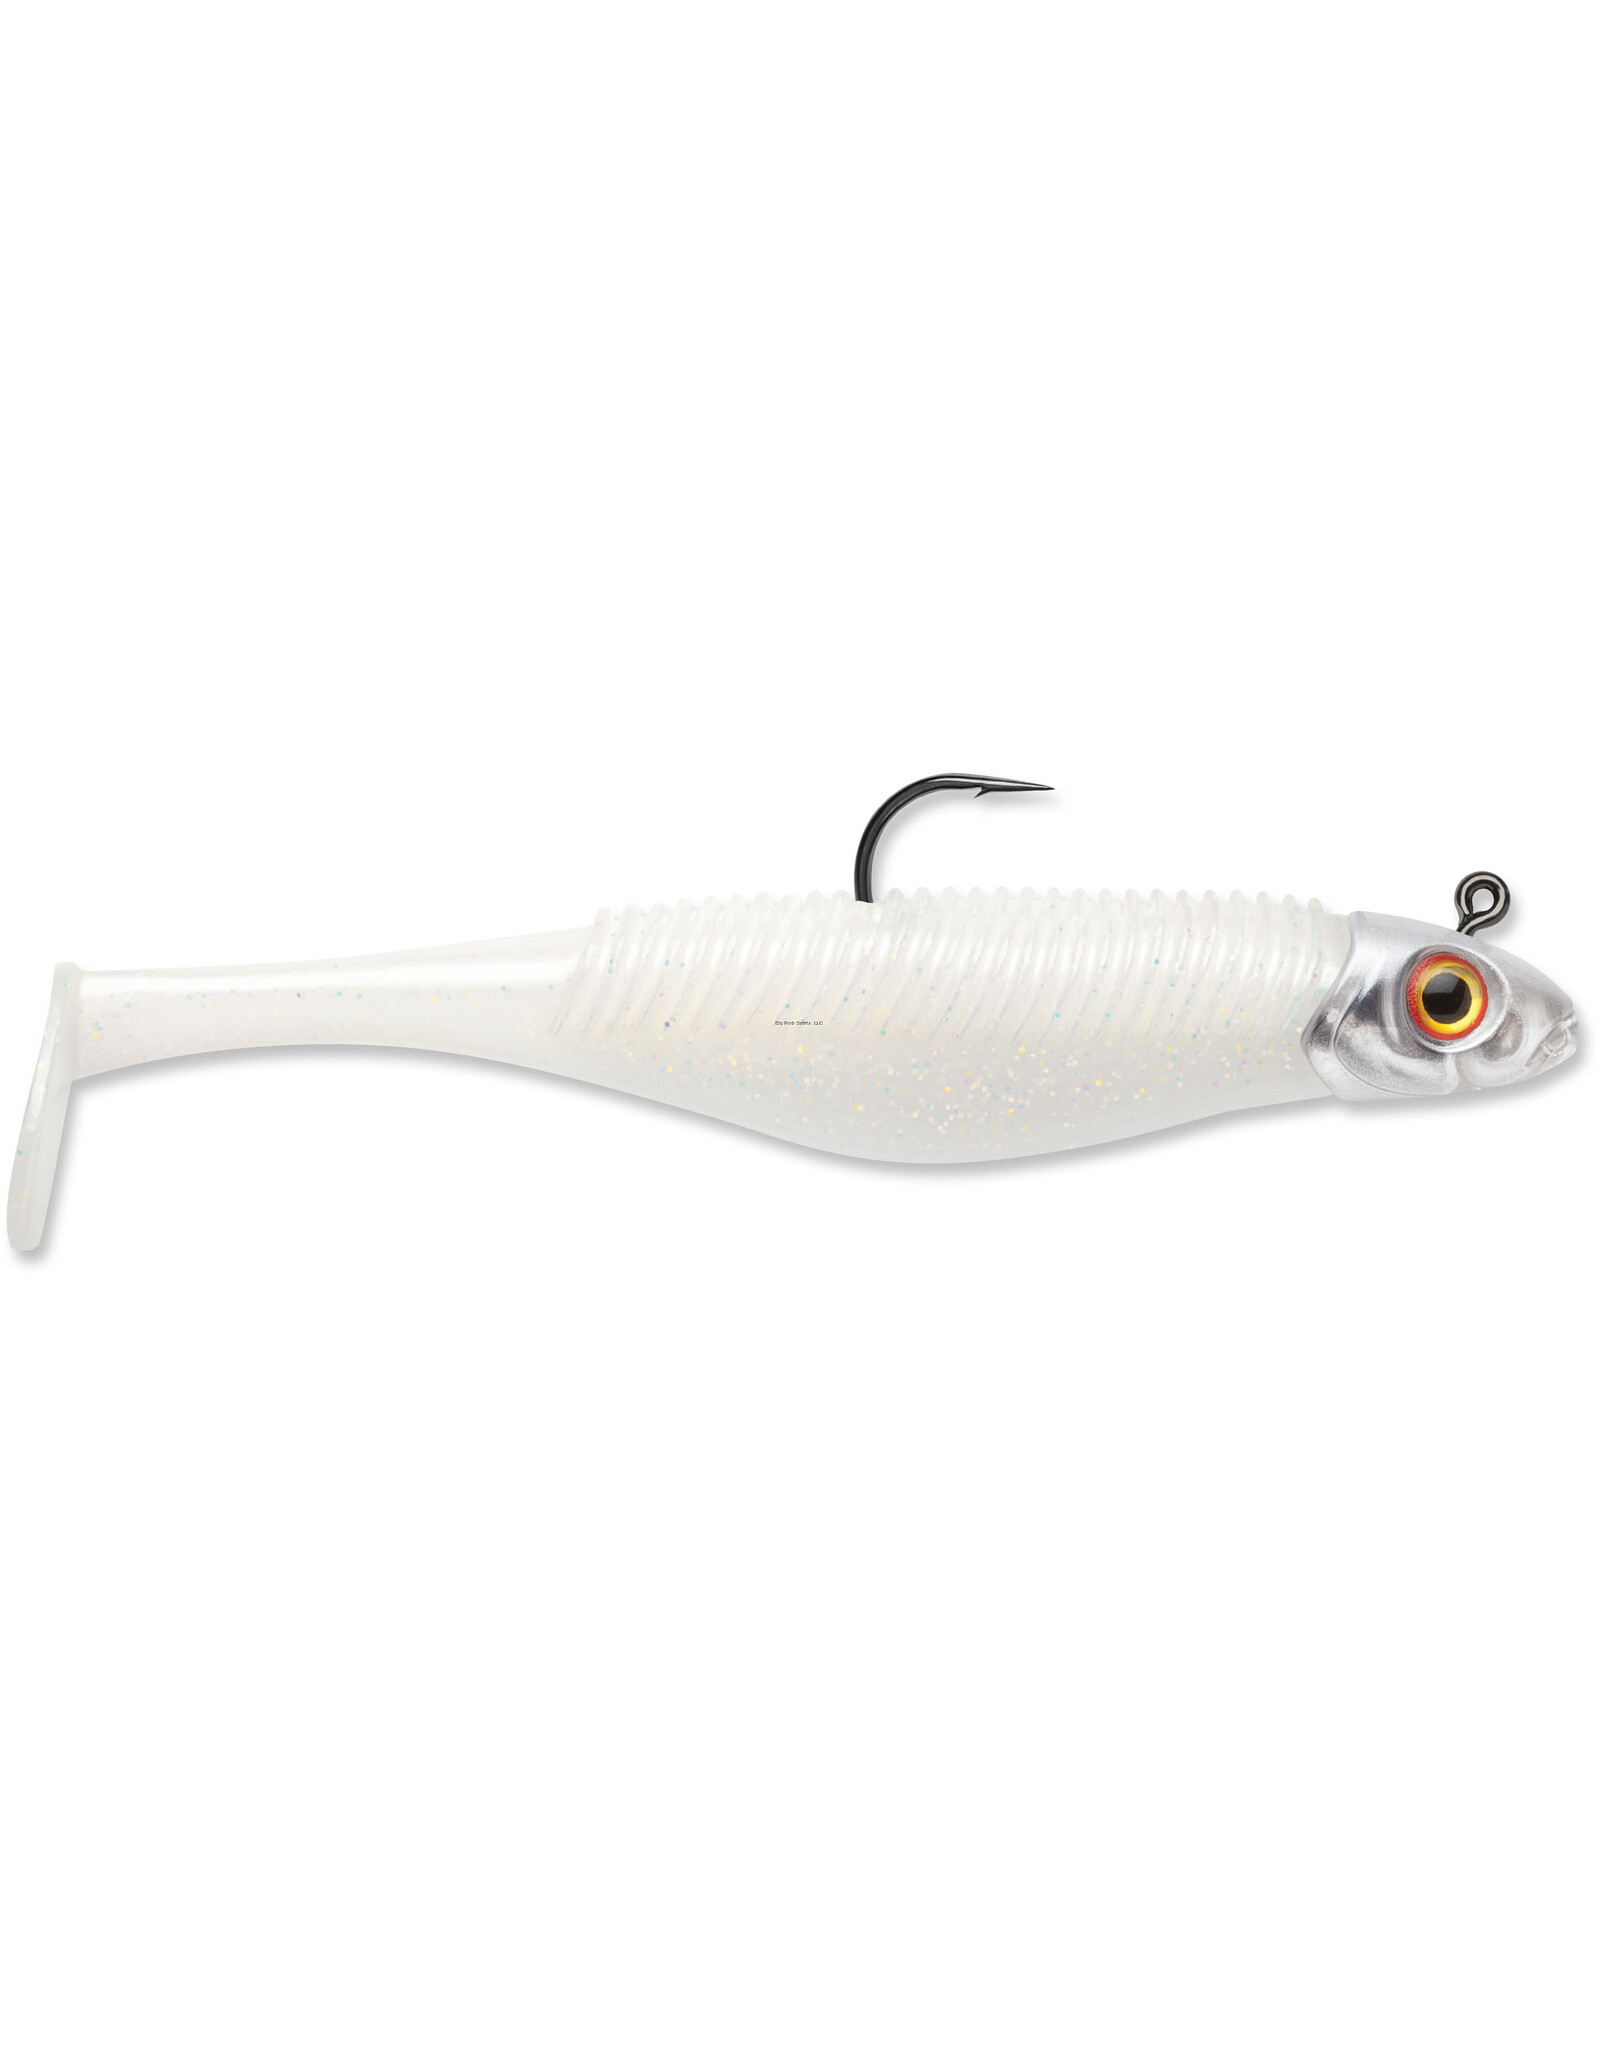 Storm Storm SBD45PI-38J 360GT Searchbait Shad, Sinking, 4-1/2", 3/8oz, #4/0 Hk, 1 Rigged Two Bodies, Pearl Ice